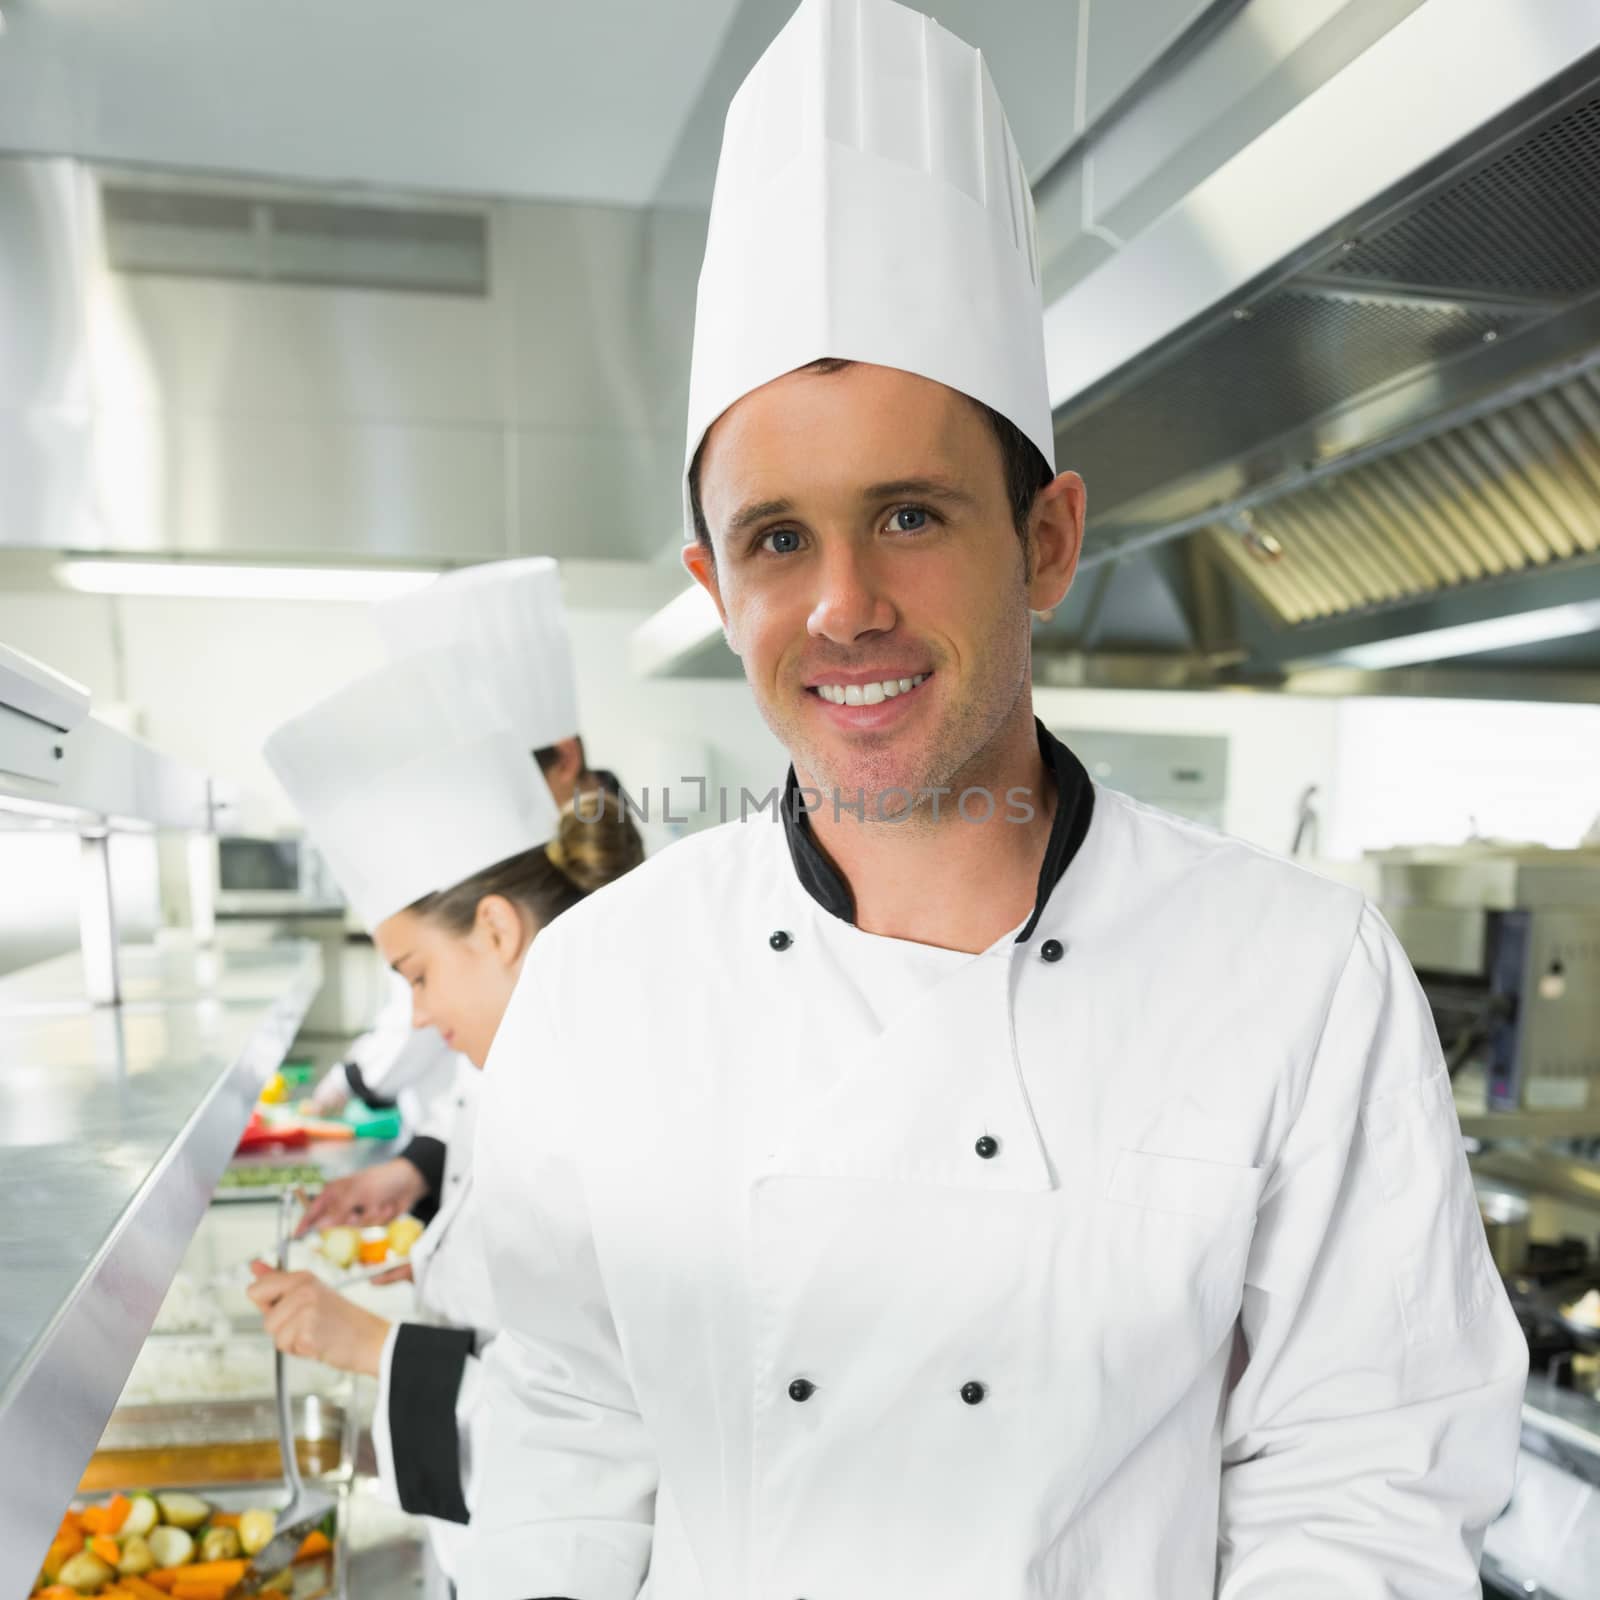 Handsome male chef posing in the kitchen smiling at the camera